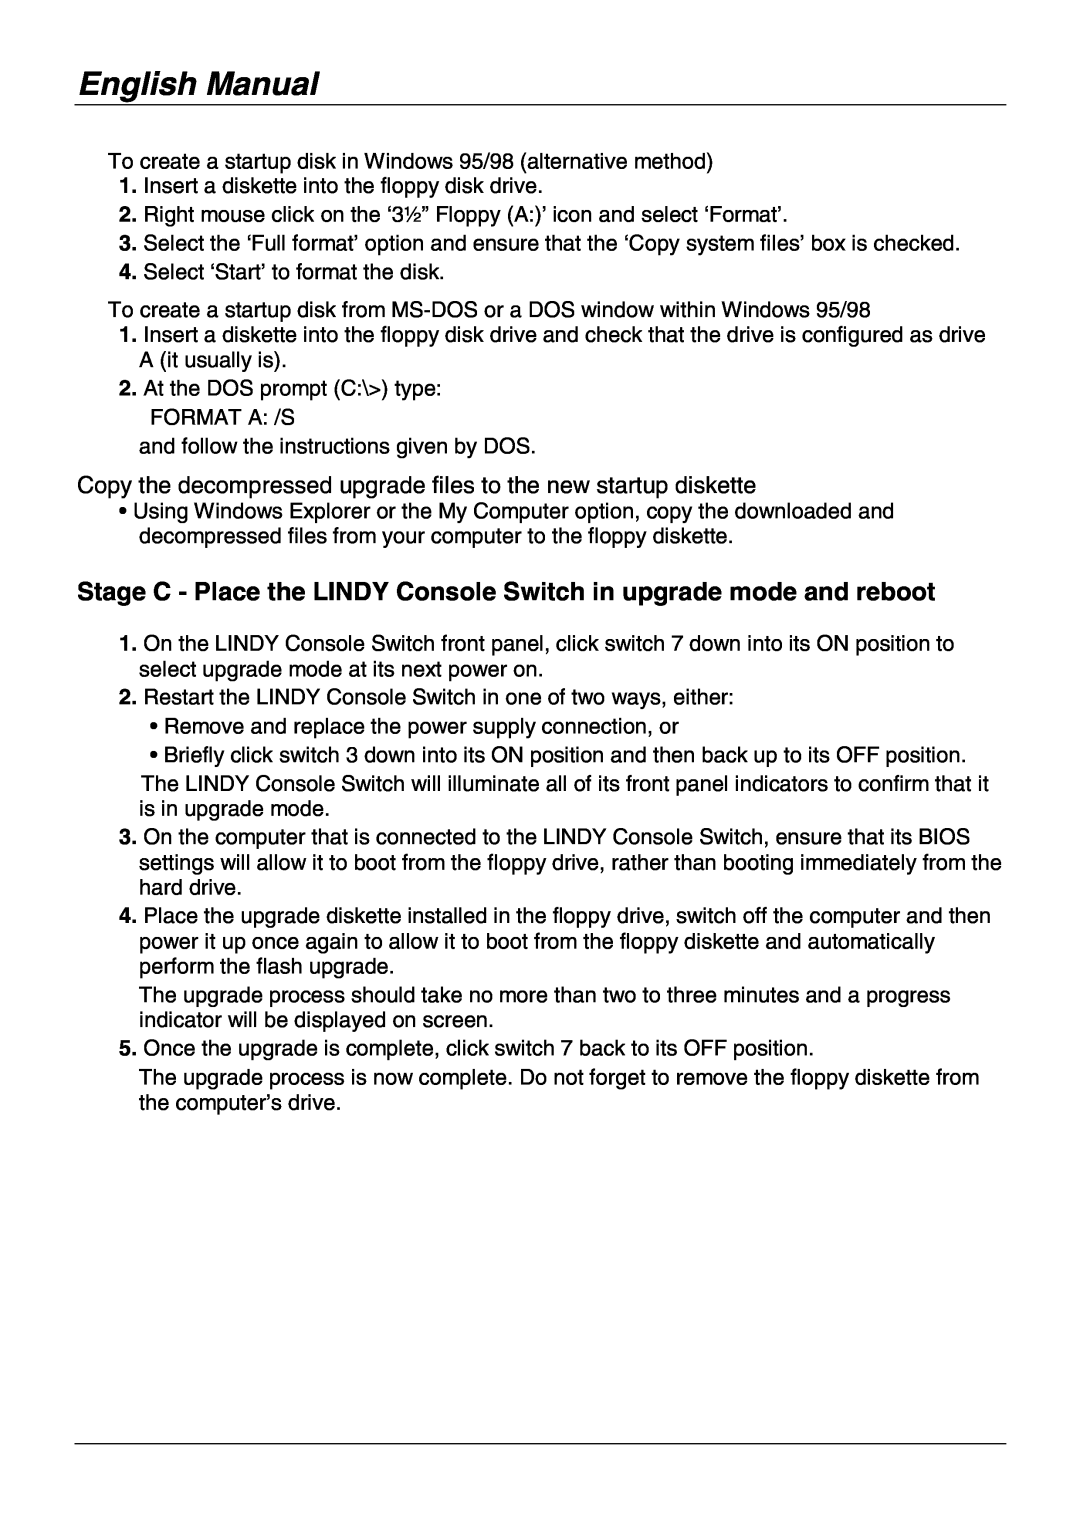 Lindy No. 39123 user manual Stage C - Place the LINDY Console Switch in upgrade mode and reboot, English Manual 